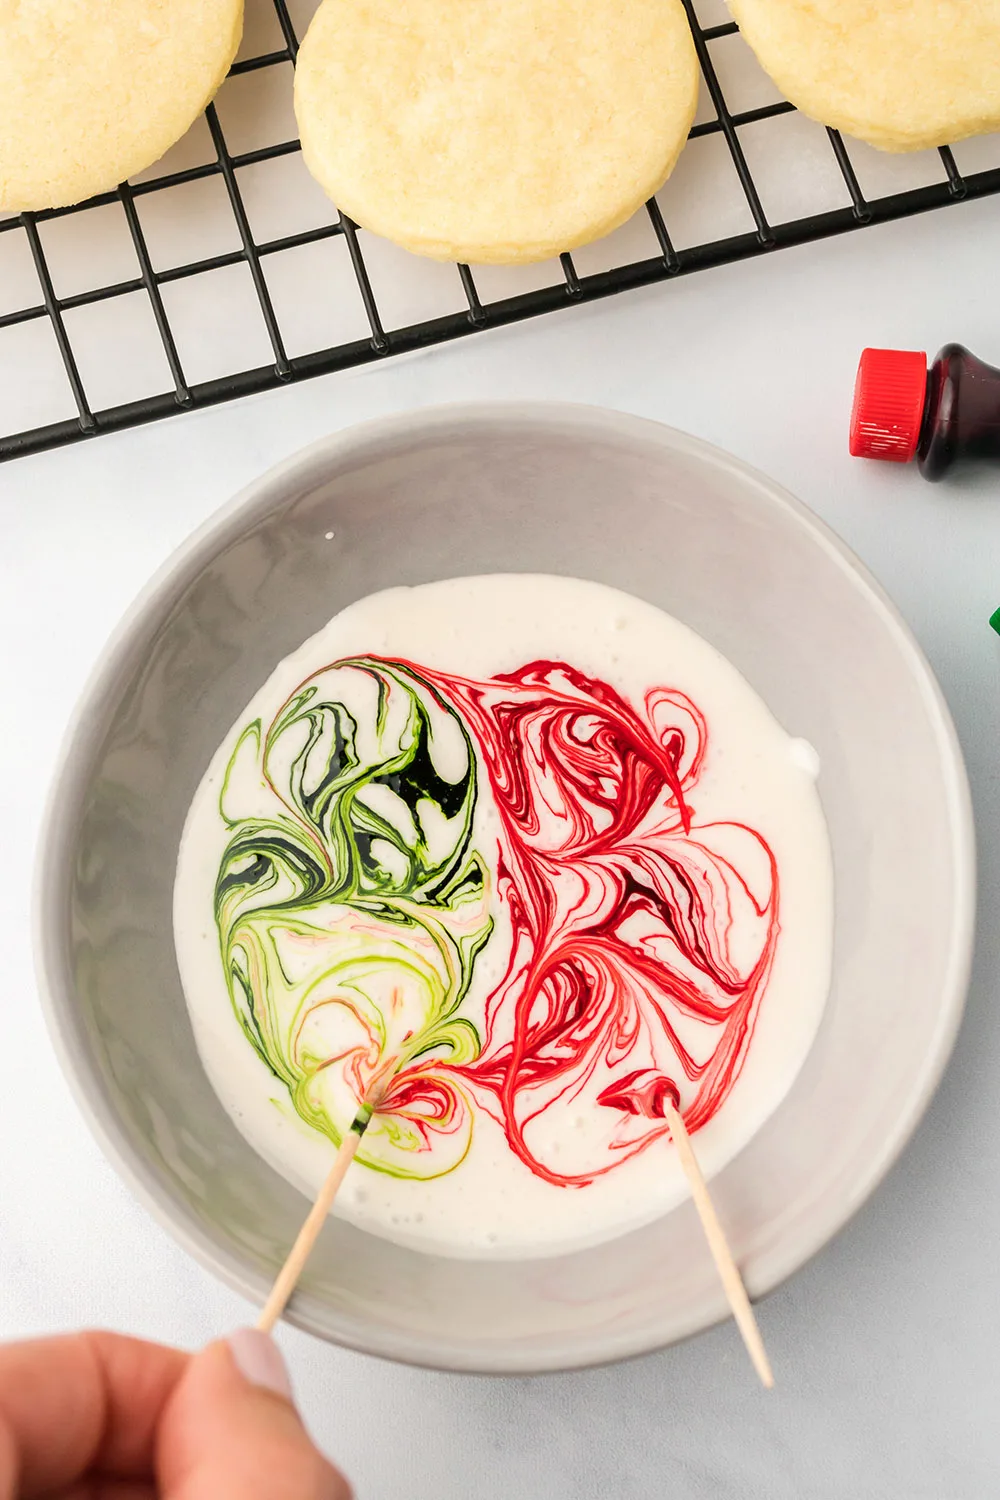 Red and green food coloring swirled in icing. 